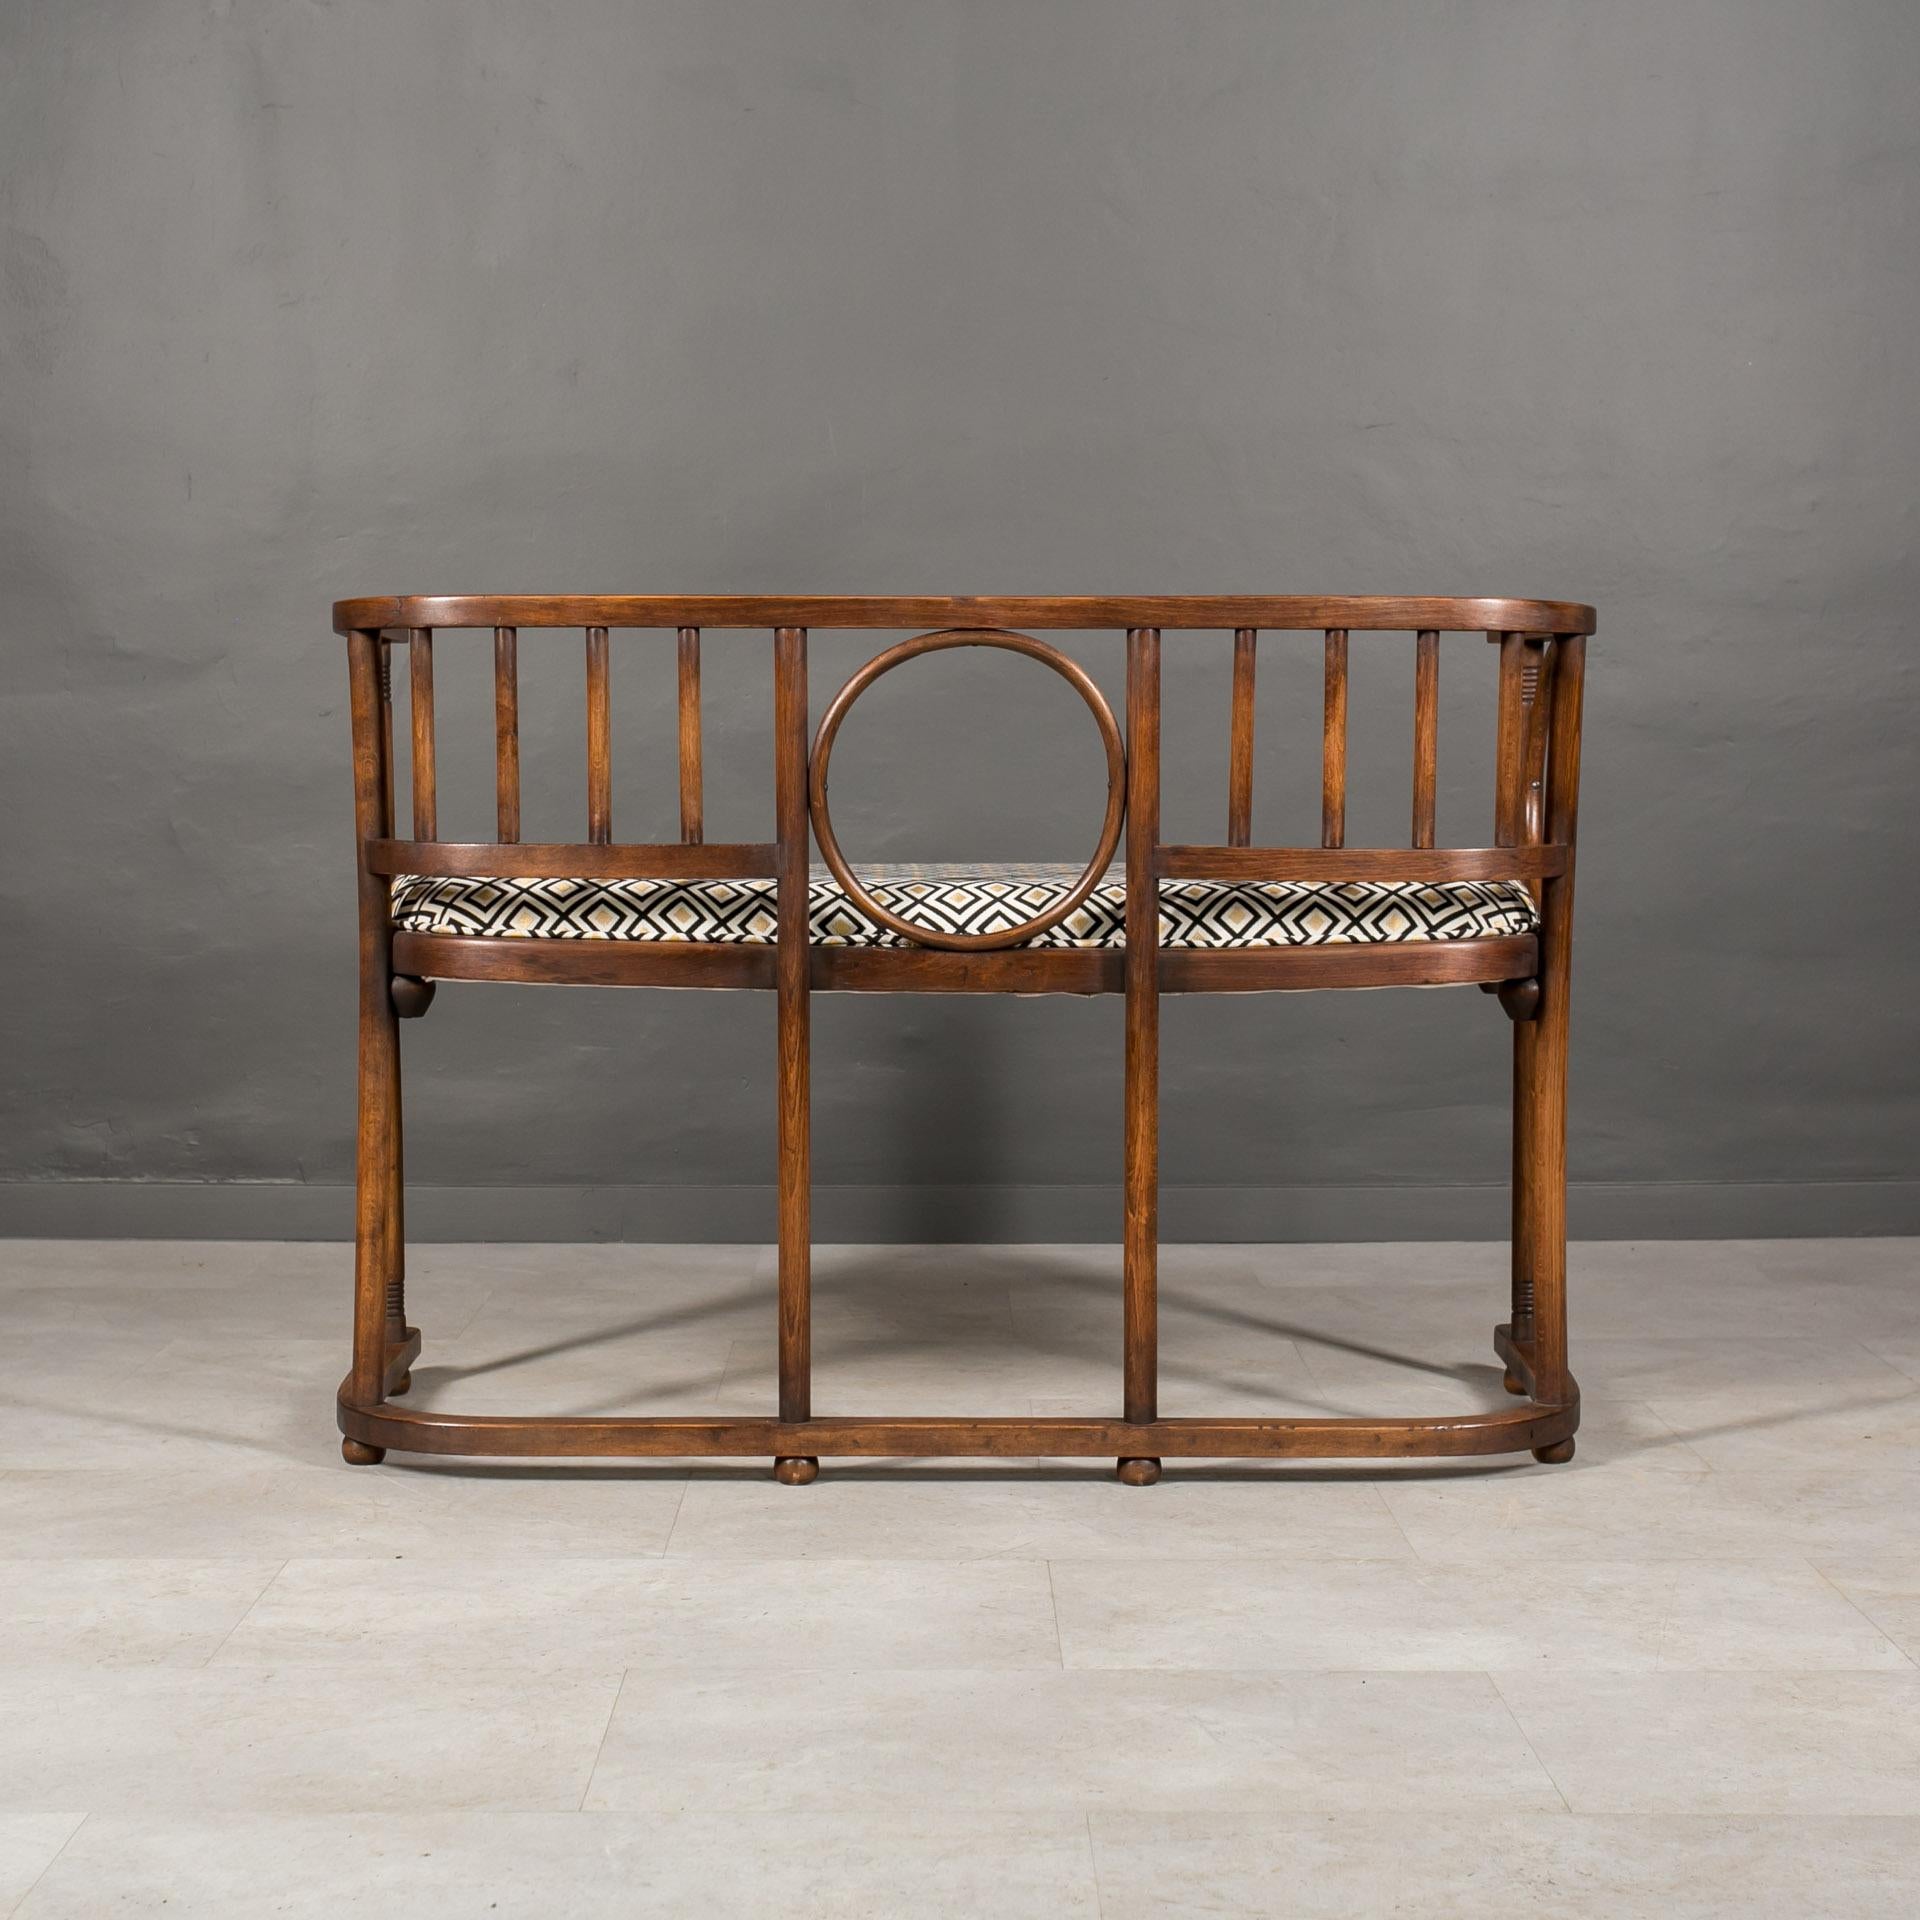 Austrian Early 20th Century Bentwood Bench Settee by J. Hoffmann for Thonet - Mundus For Sale